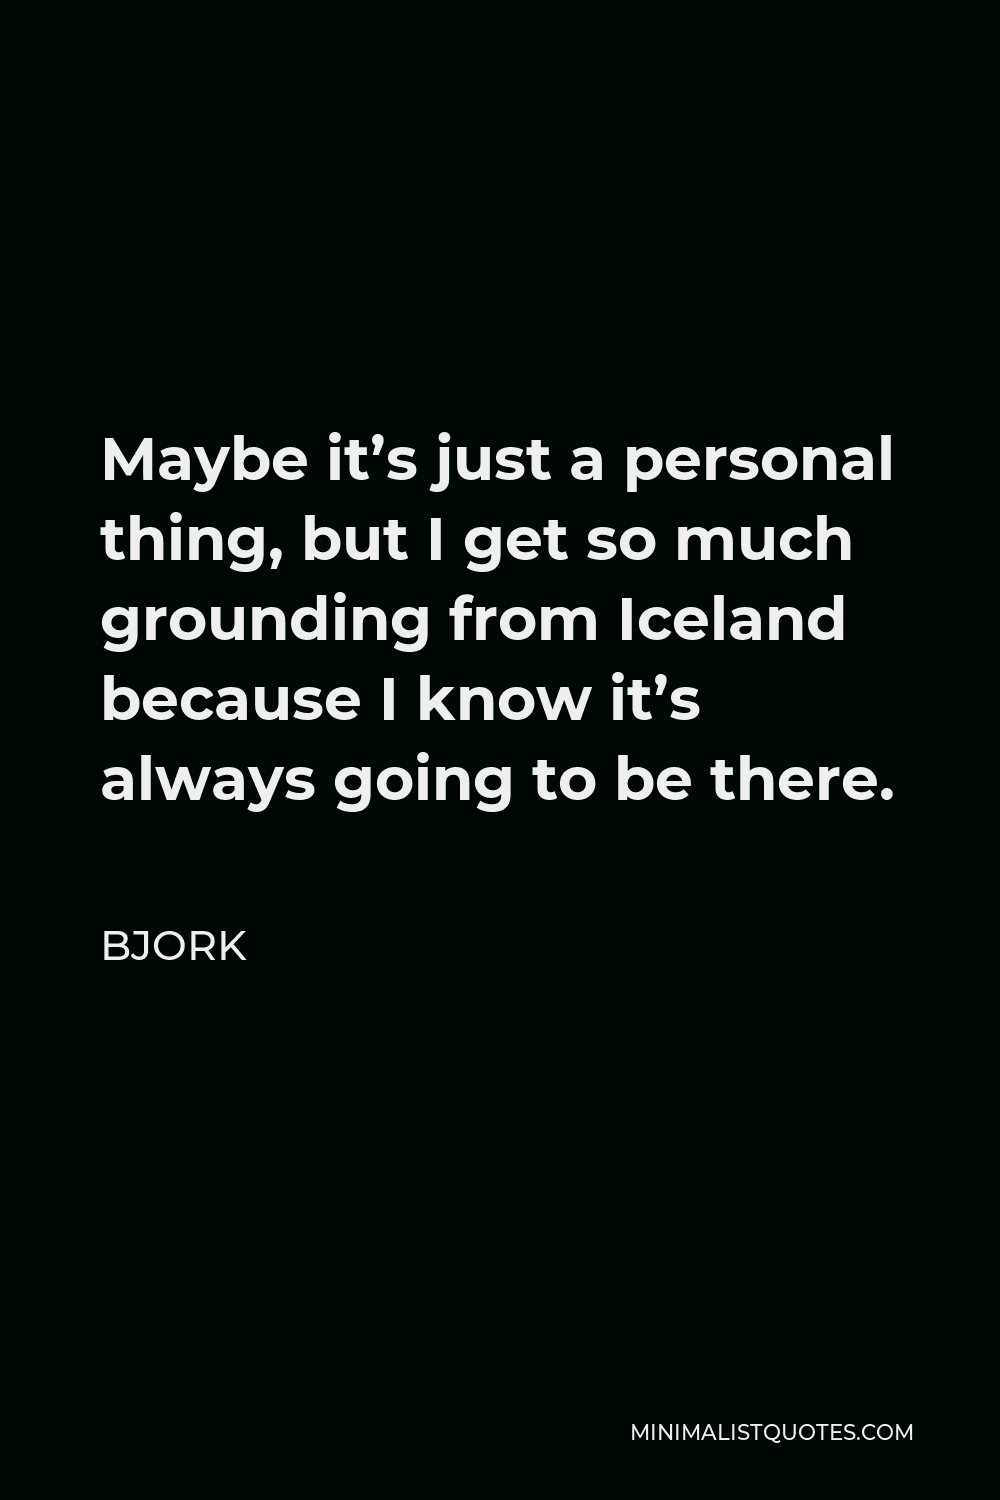 Bjork Quote - Maybe it’s just a personal thing, but I get so much grounding from Iceland because I know it’s always going to be there.